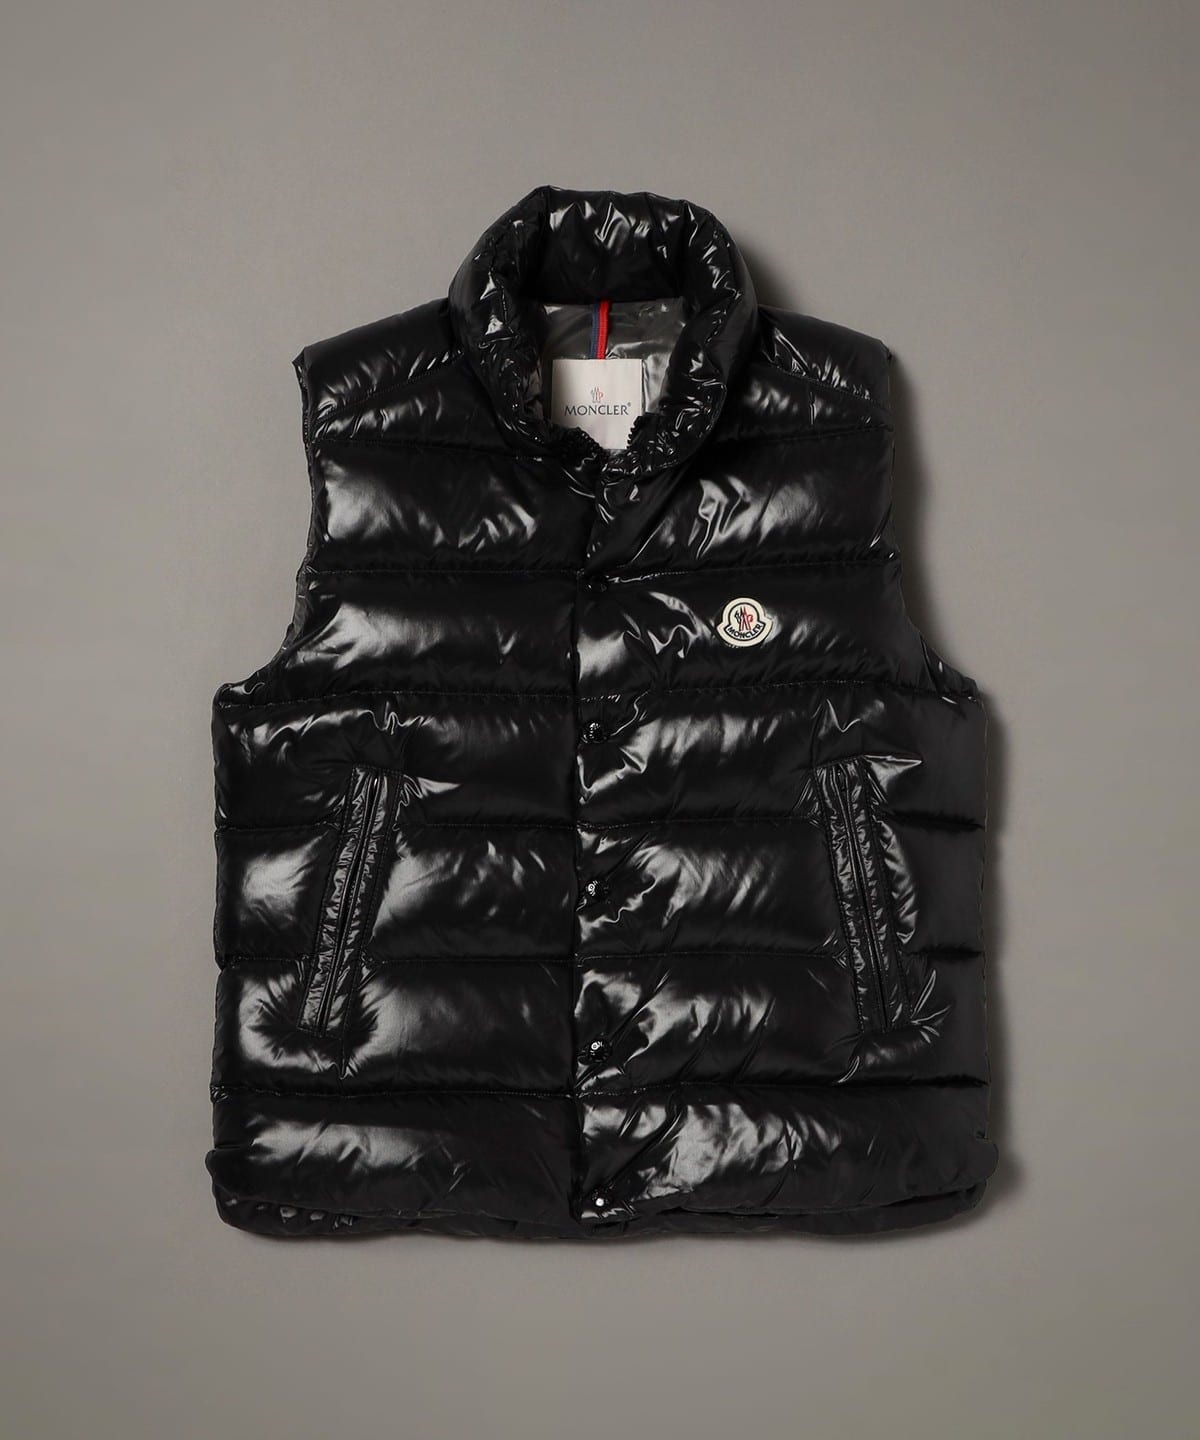 MONCLER　キッズベスト　size2季節感冬